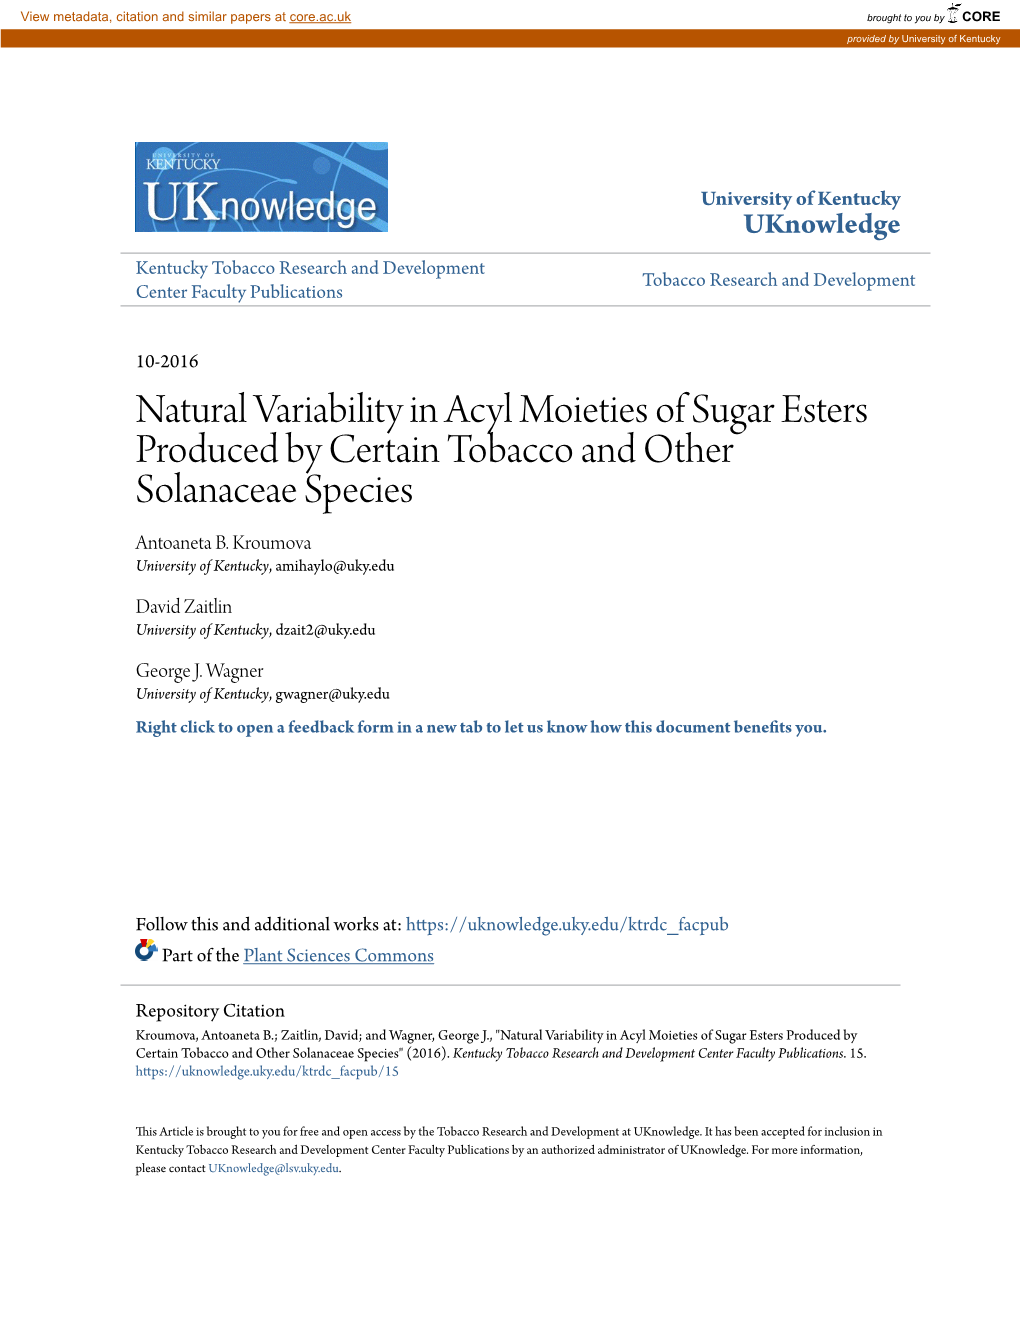 Natural Variability in Acyl Moieties of Sugar Esters Produced by Certain Tobacco and Other Solanaceae Species Antoaneta B